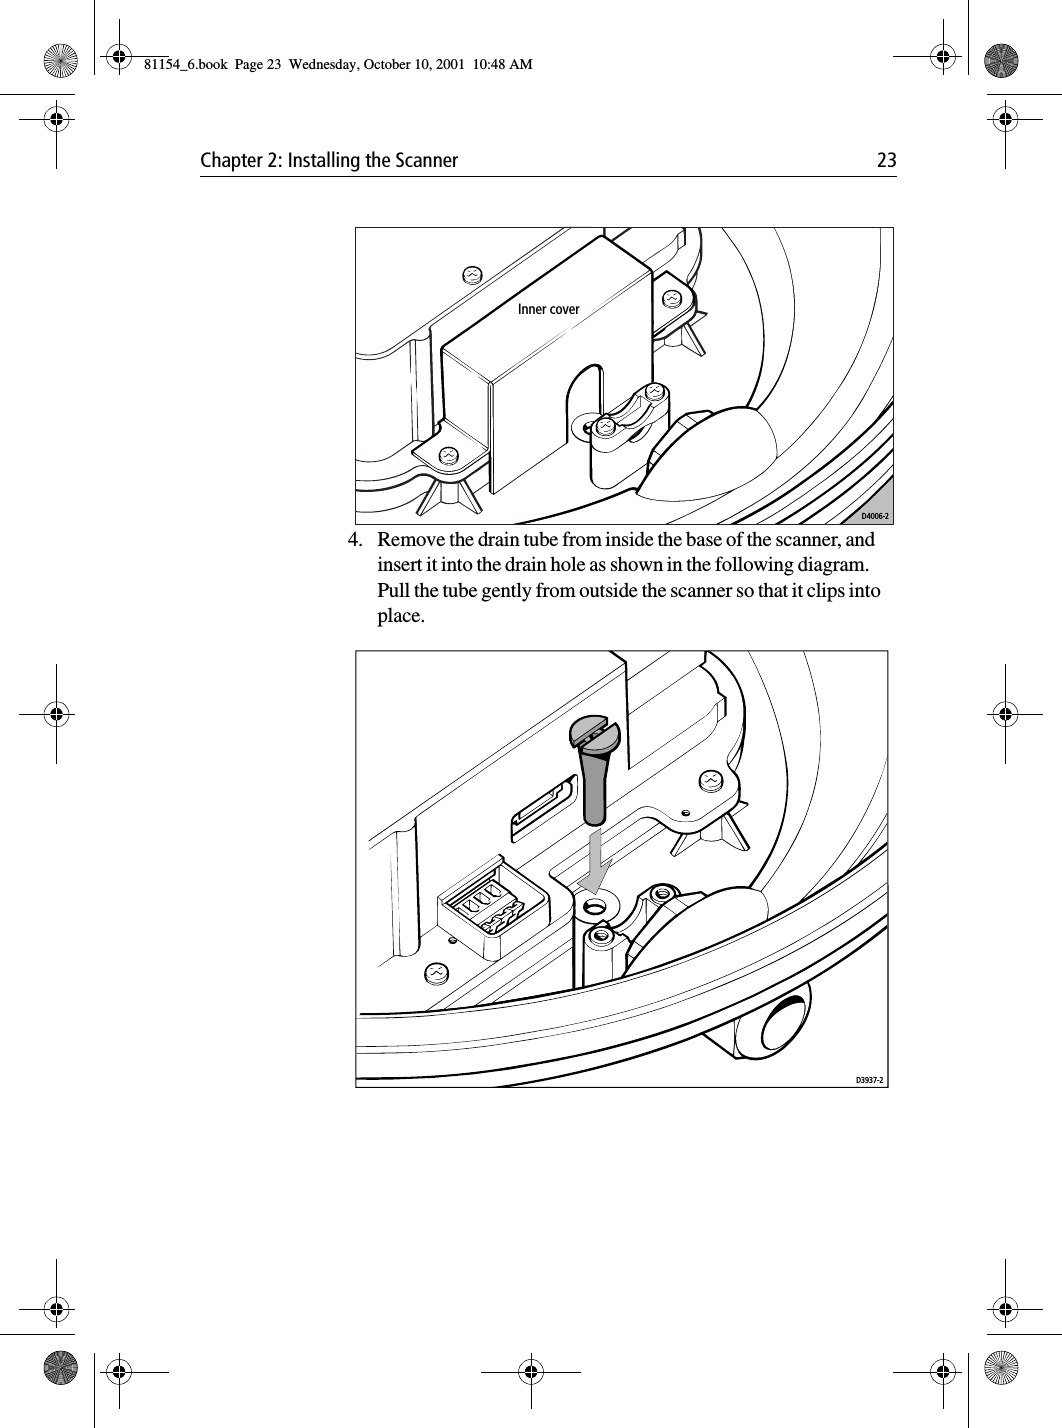 Chapter 2: Installing the Scanner 234. Remove the drain tube from inside the base of the scanner, and insert it into the drain hole as shown in the following diagram. Pull the tube gently from outside the scanner so that it clips into place. D4006-2Inner coverD3937-281154_6.book  Page 23  Wednesday, October 10, 2001  10:48 AM